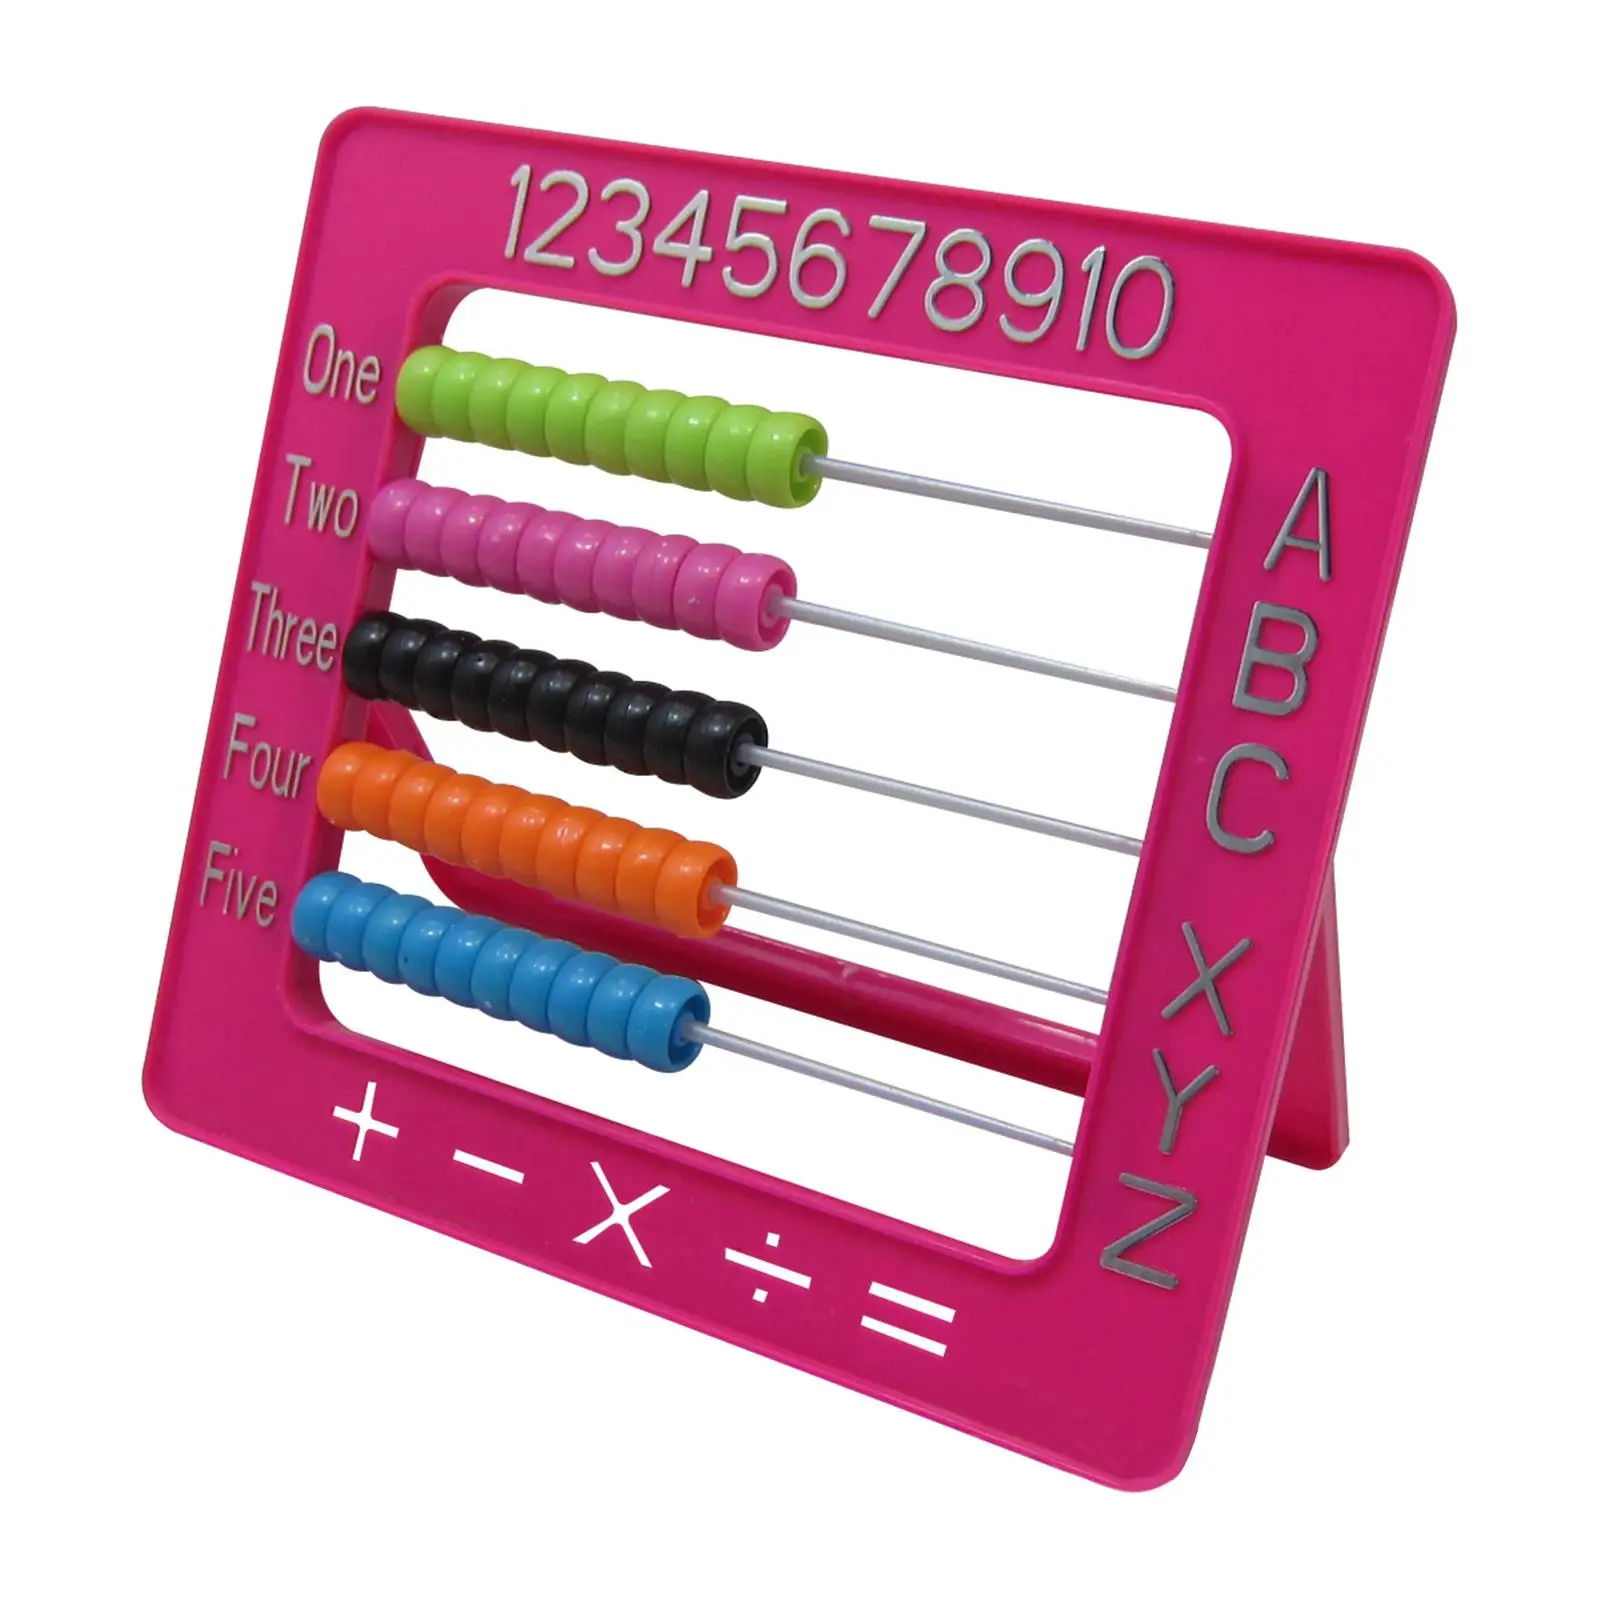 Mini Calculating Beads Toys Math Calculating Tool Toy for Birthday Gifts